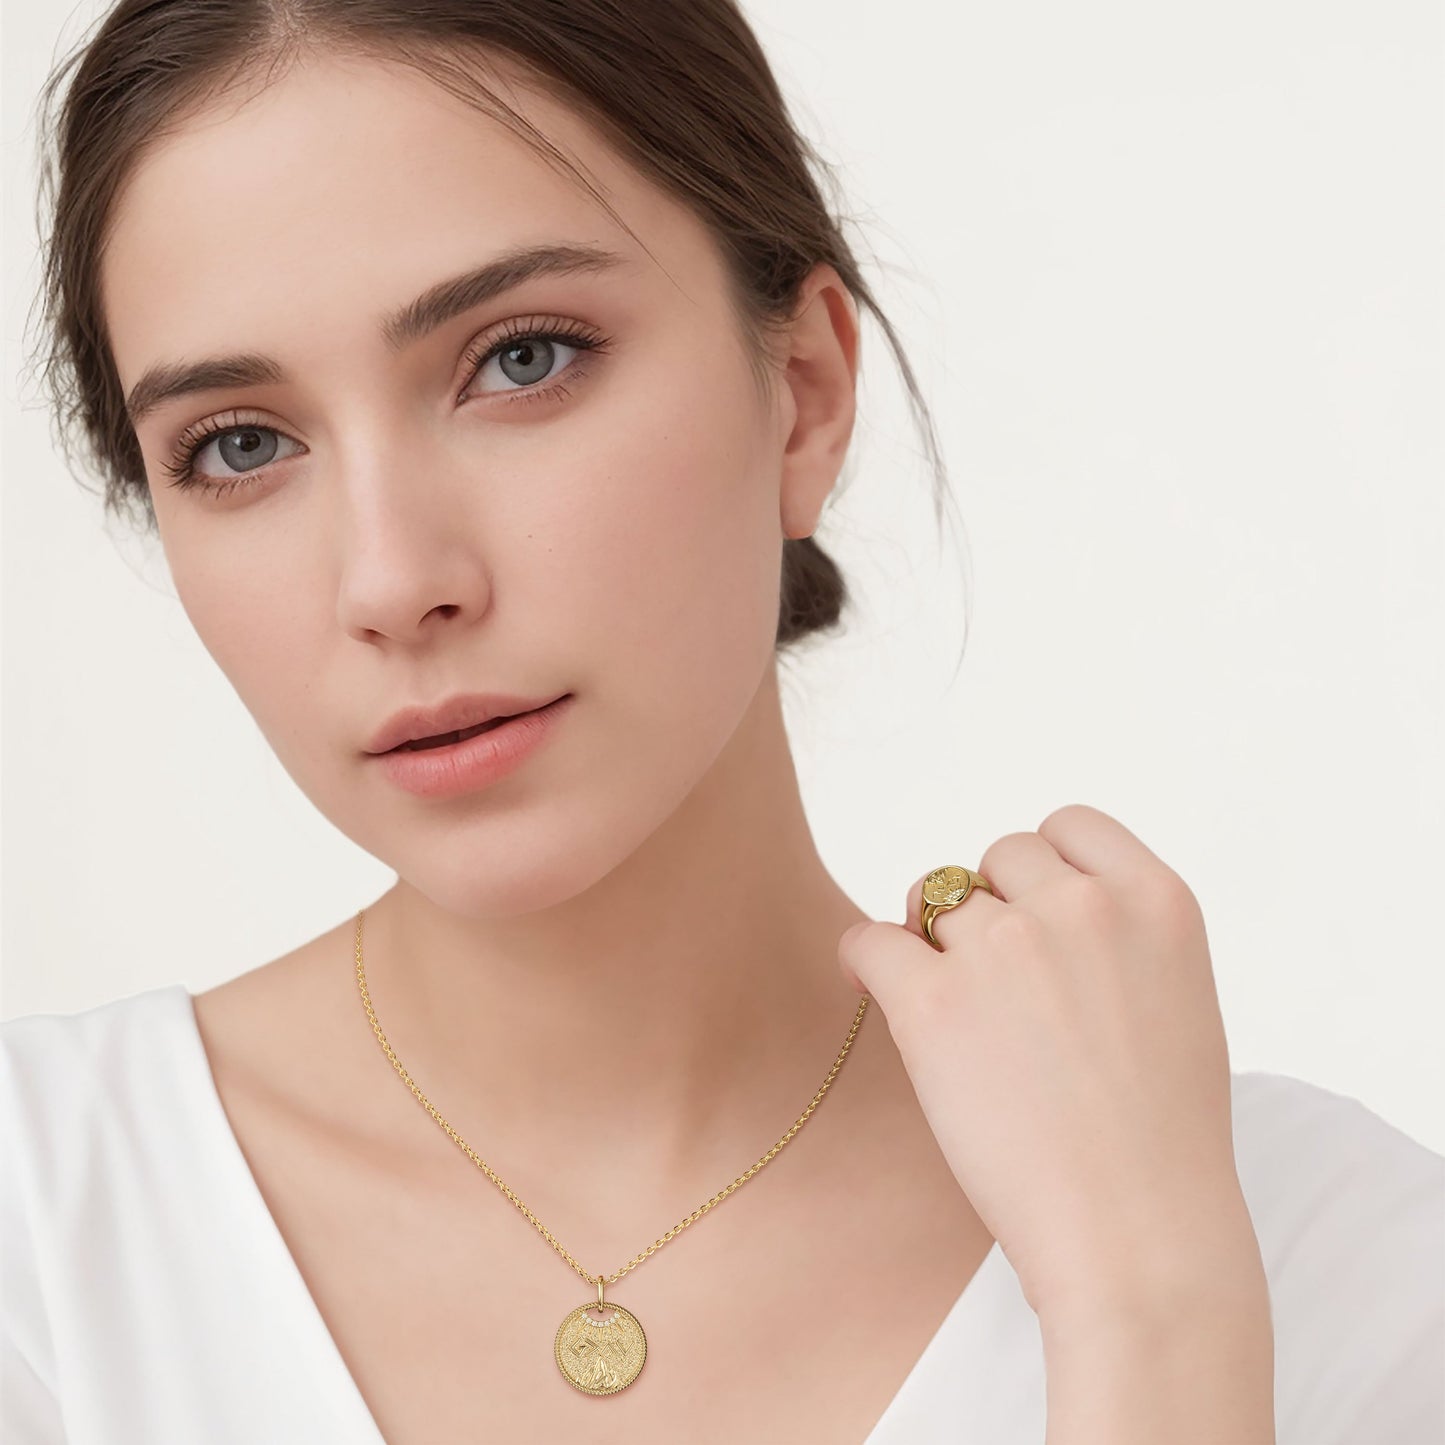 Highs And Lows Gold Coin Necklace